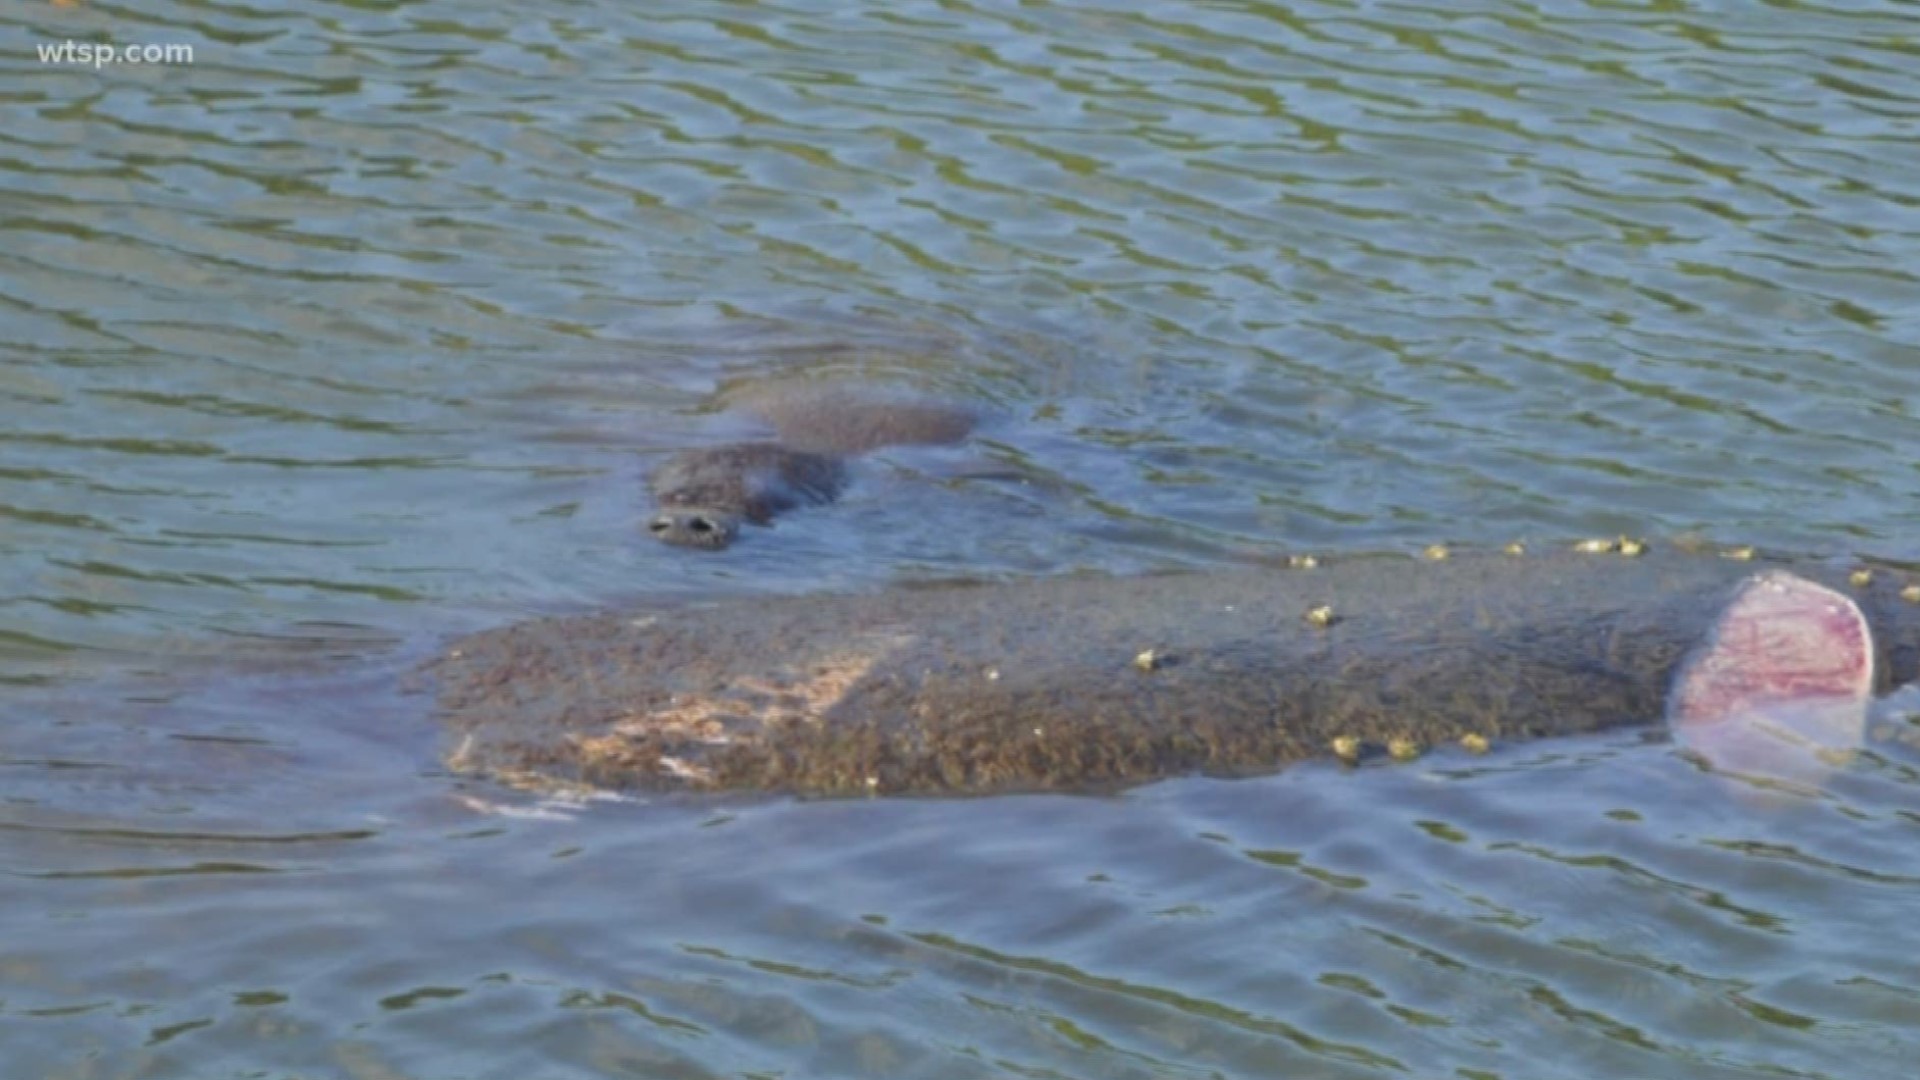 The FWC is monitoring the manatee's health until crews are able to get out and rescue her.